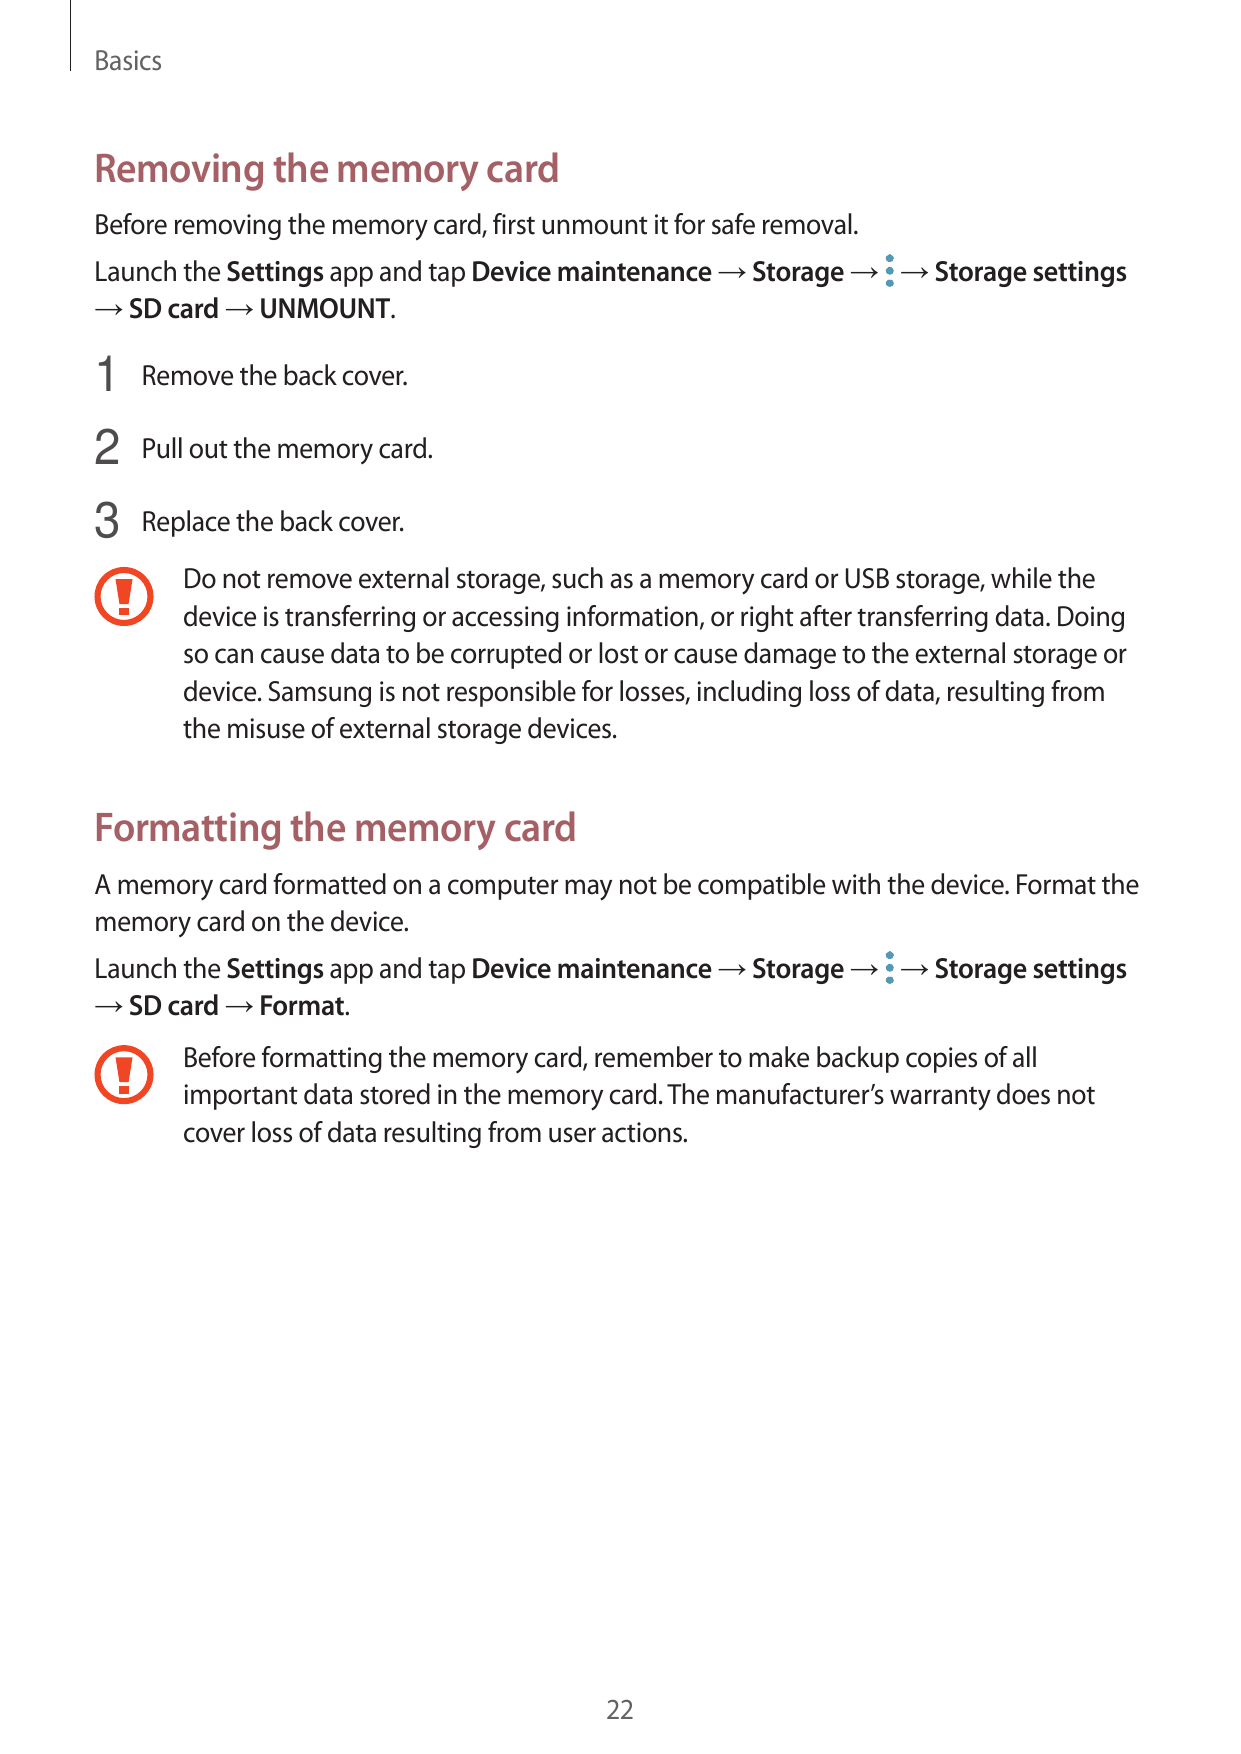 BasicsRemoving the memory cardBefore removing the memory card, first unmount it for safe removal.Launch the Settings app and tap